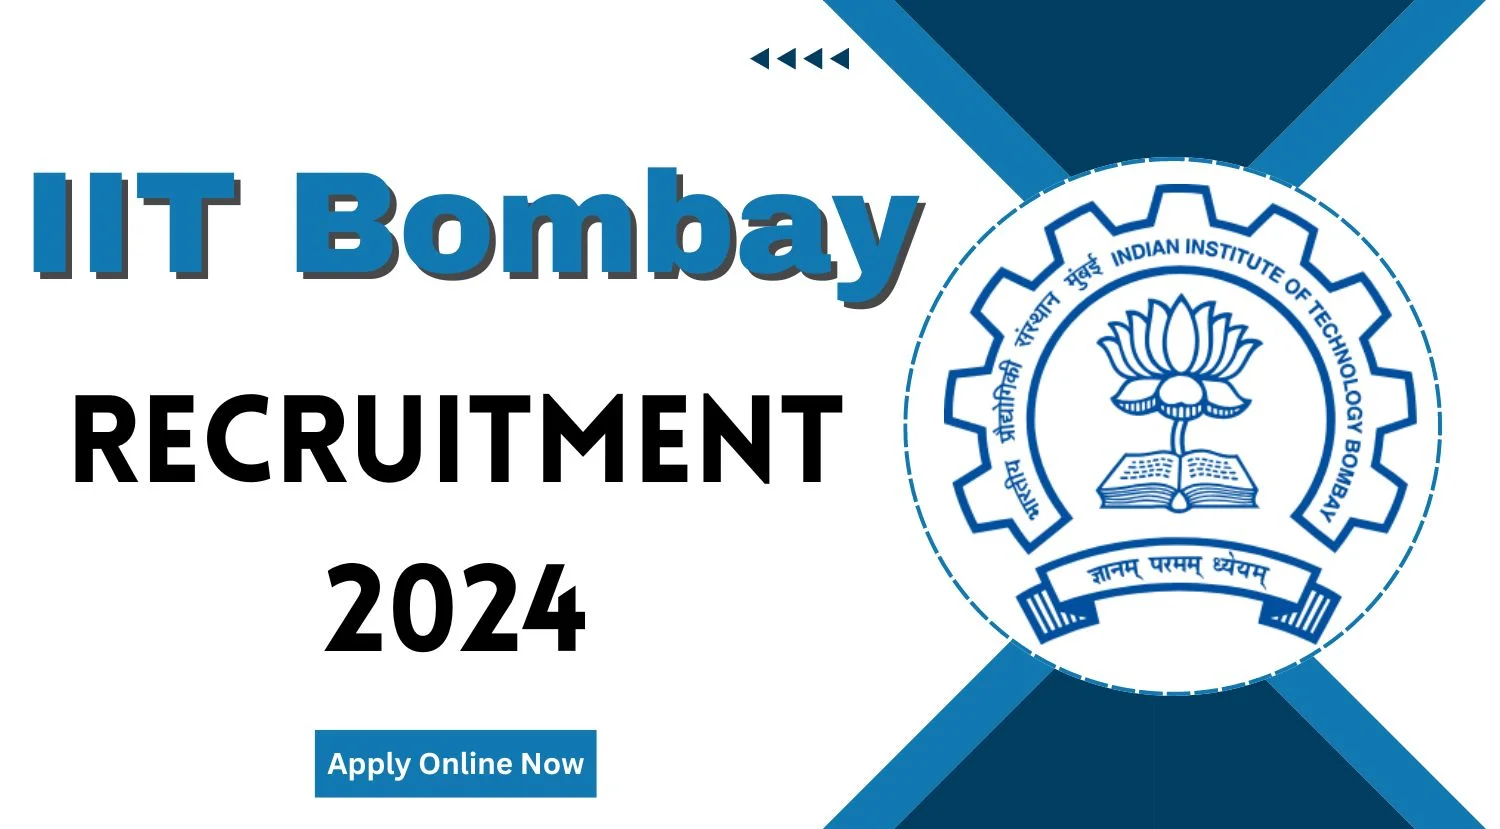 IIT Bombay Assistant Security Officers and Officers on Special Duty Recruitment 2024